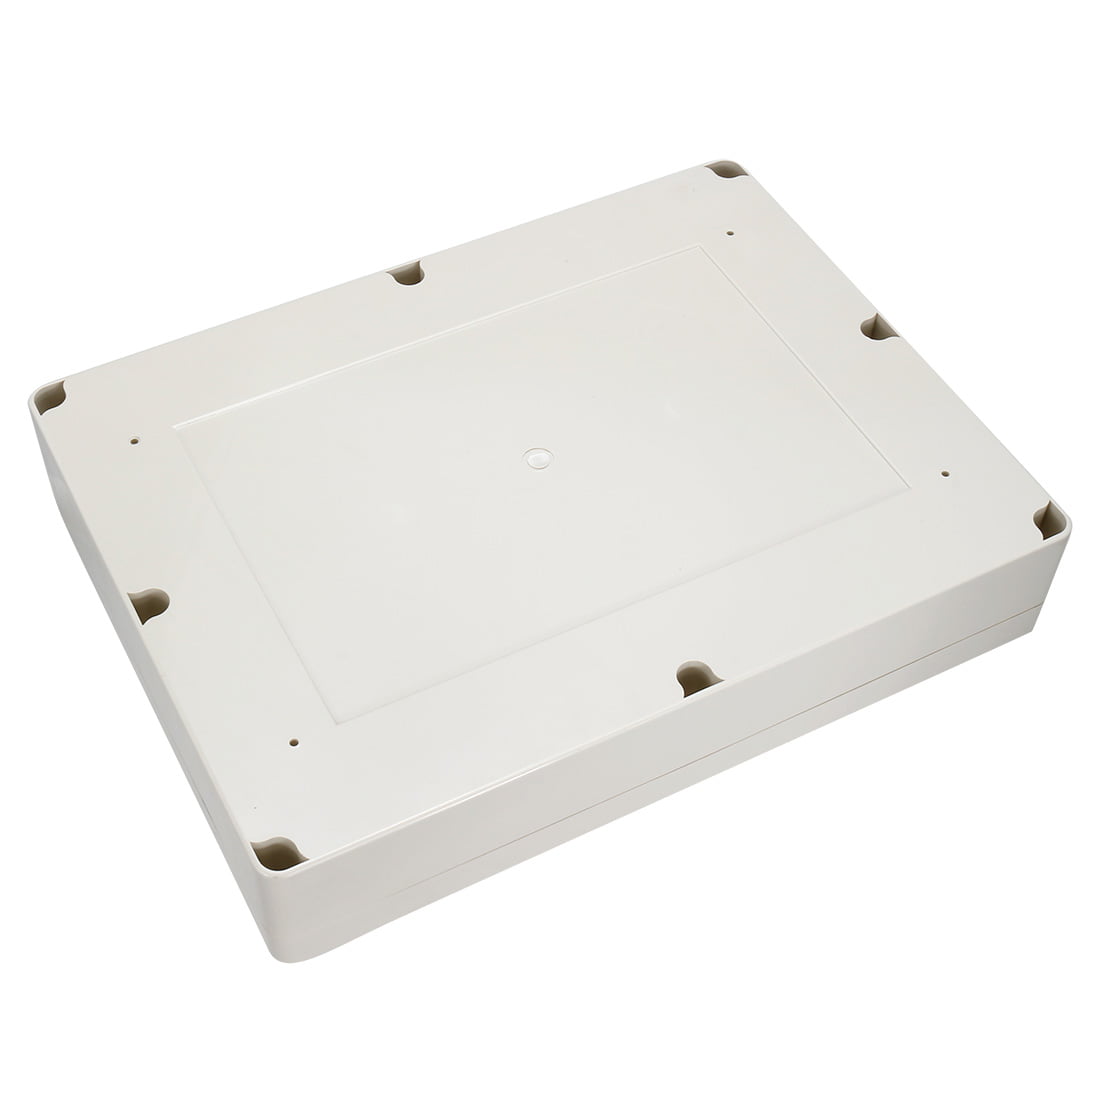 ABS Junction Box Universal Project Enclosure 320mmx240mmx60mm Details about   12.6"x9.45"x2.36" 